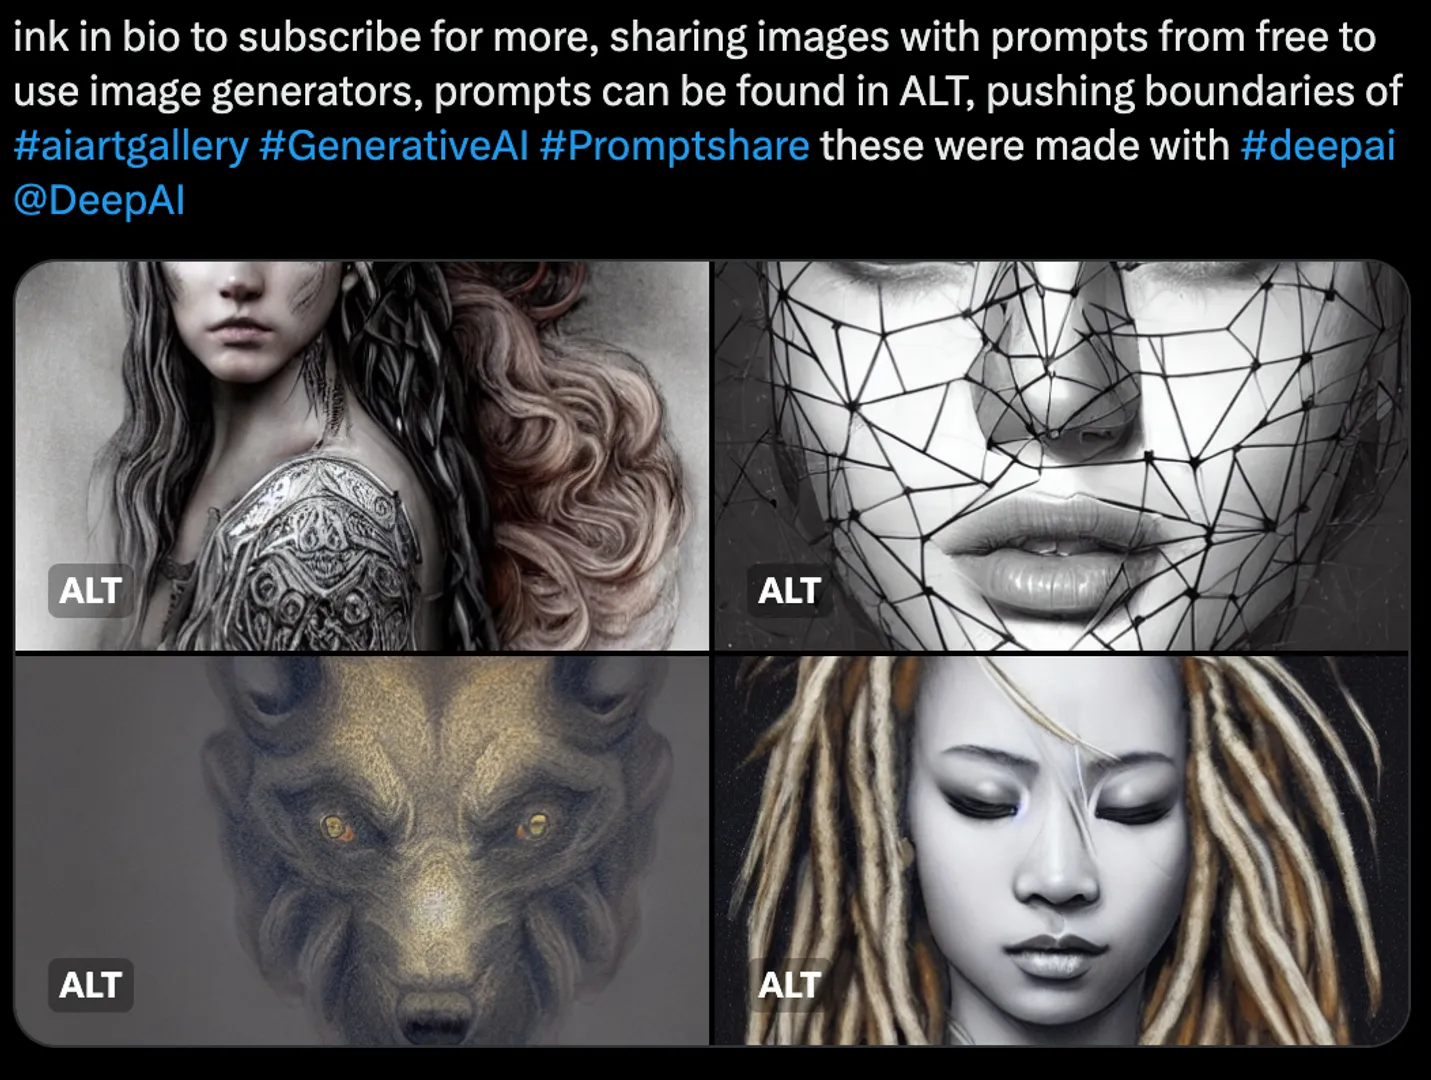 Interested in learning AI art? come join us on the journey

https://twitter.com/CreativesXtra/status/1690922977192202240?s=20